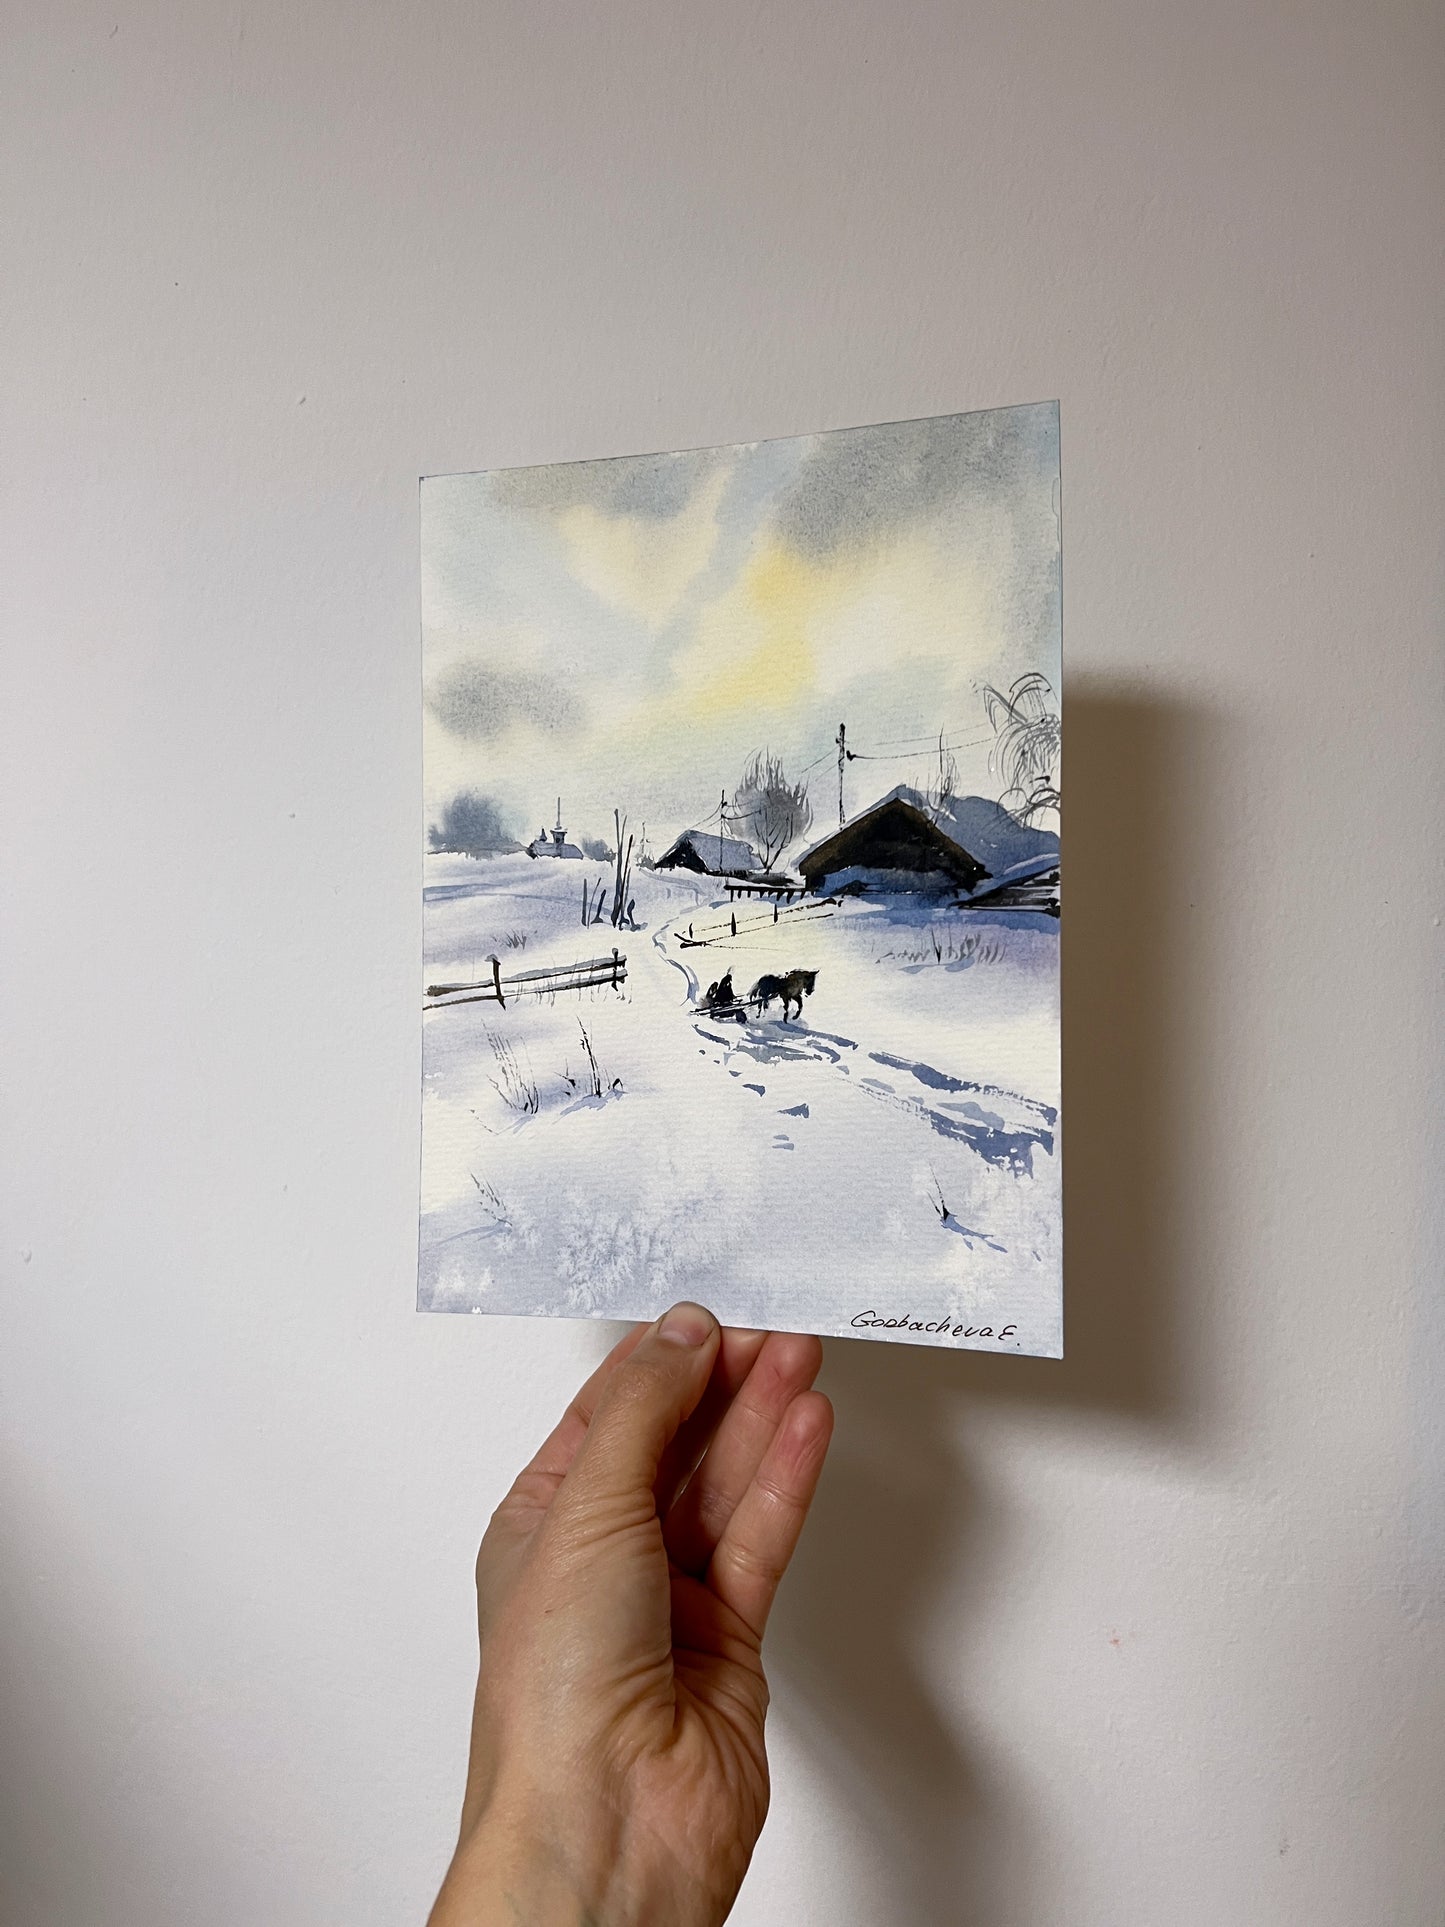 Rustic Winter Small Painting, Original Watercolor Artwork, Christmas Morning, Art Lover Gift & Wall Decor, Landscape